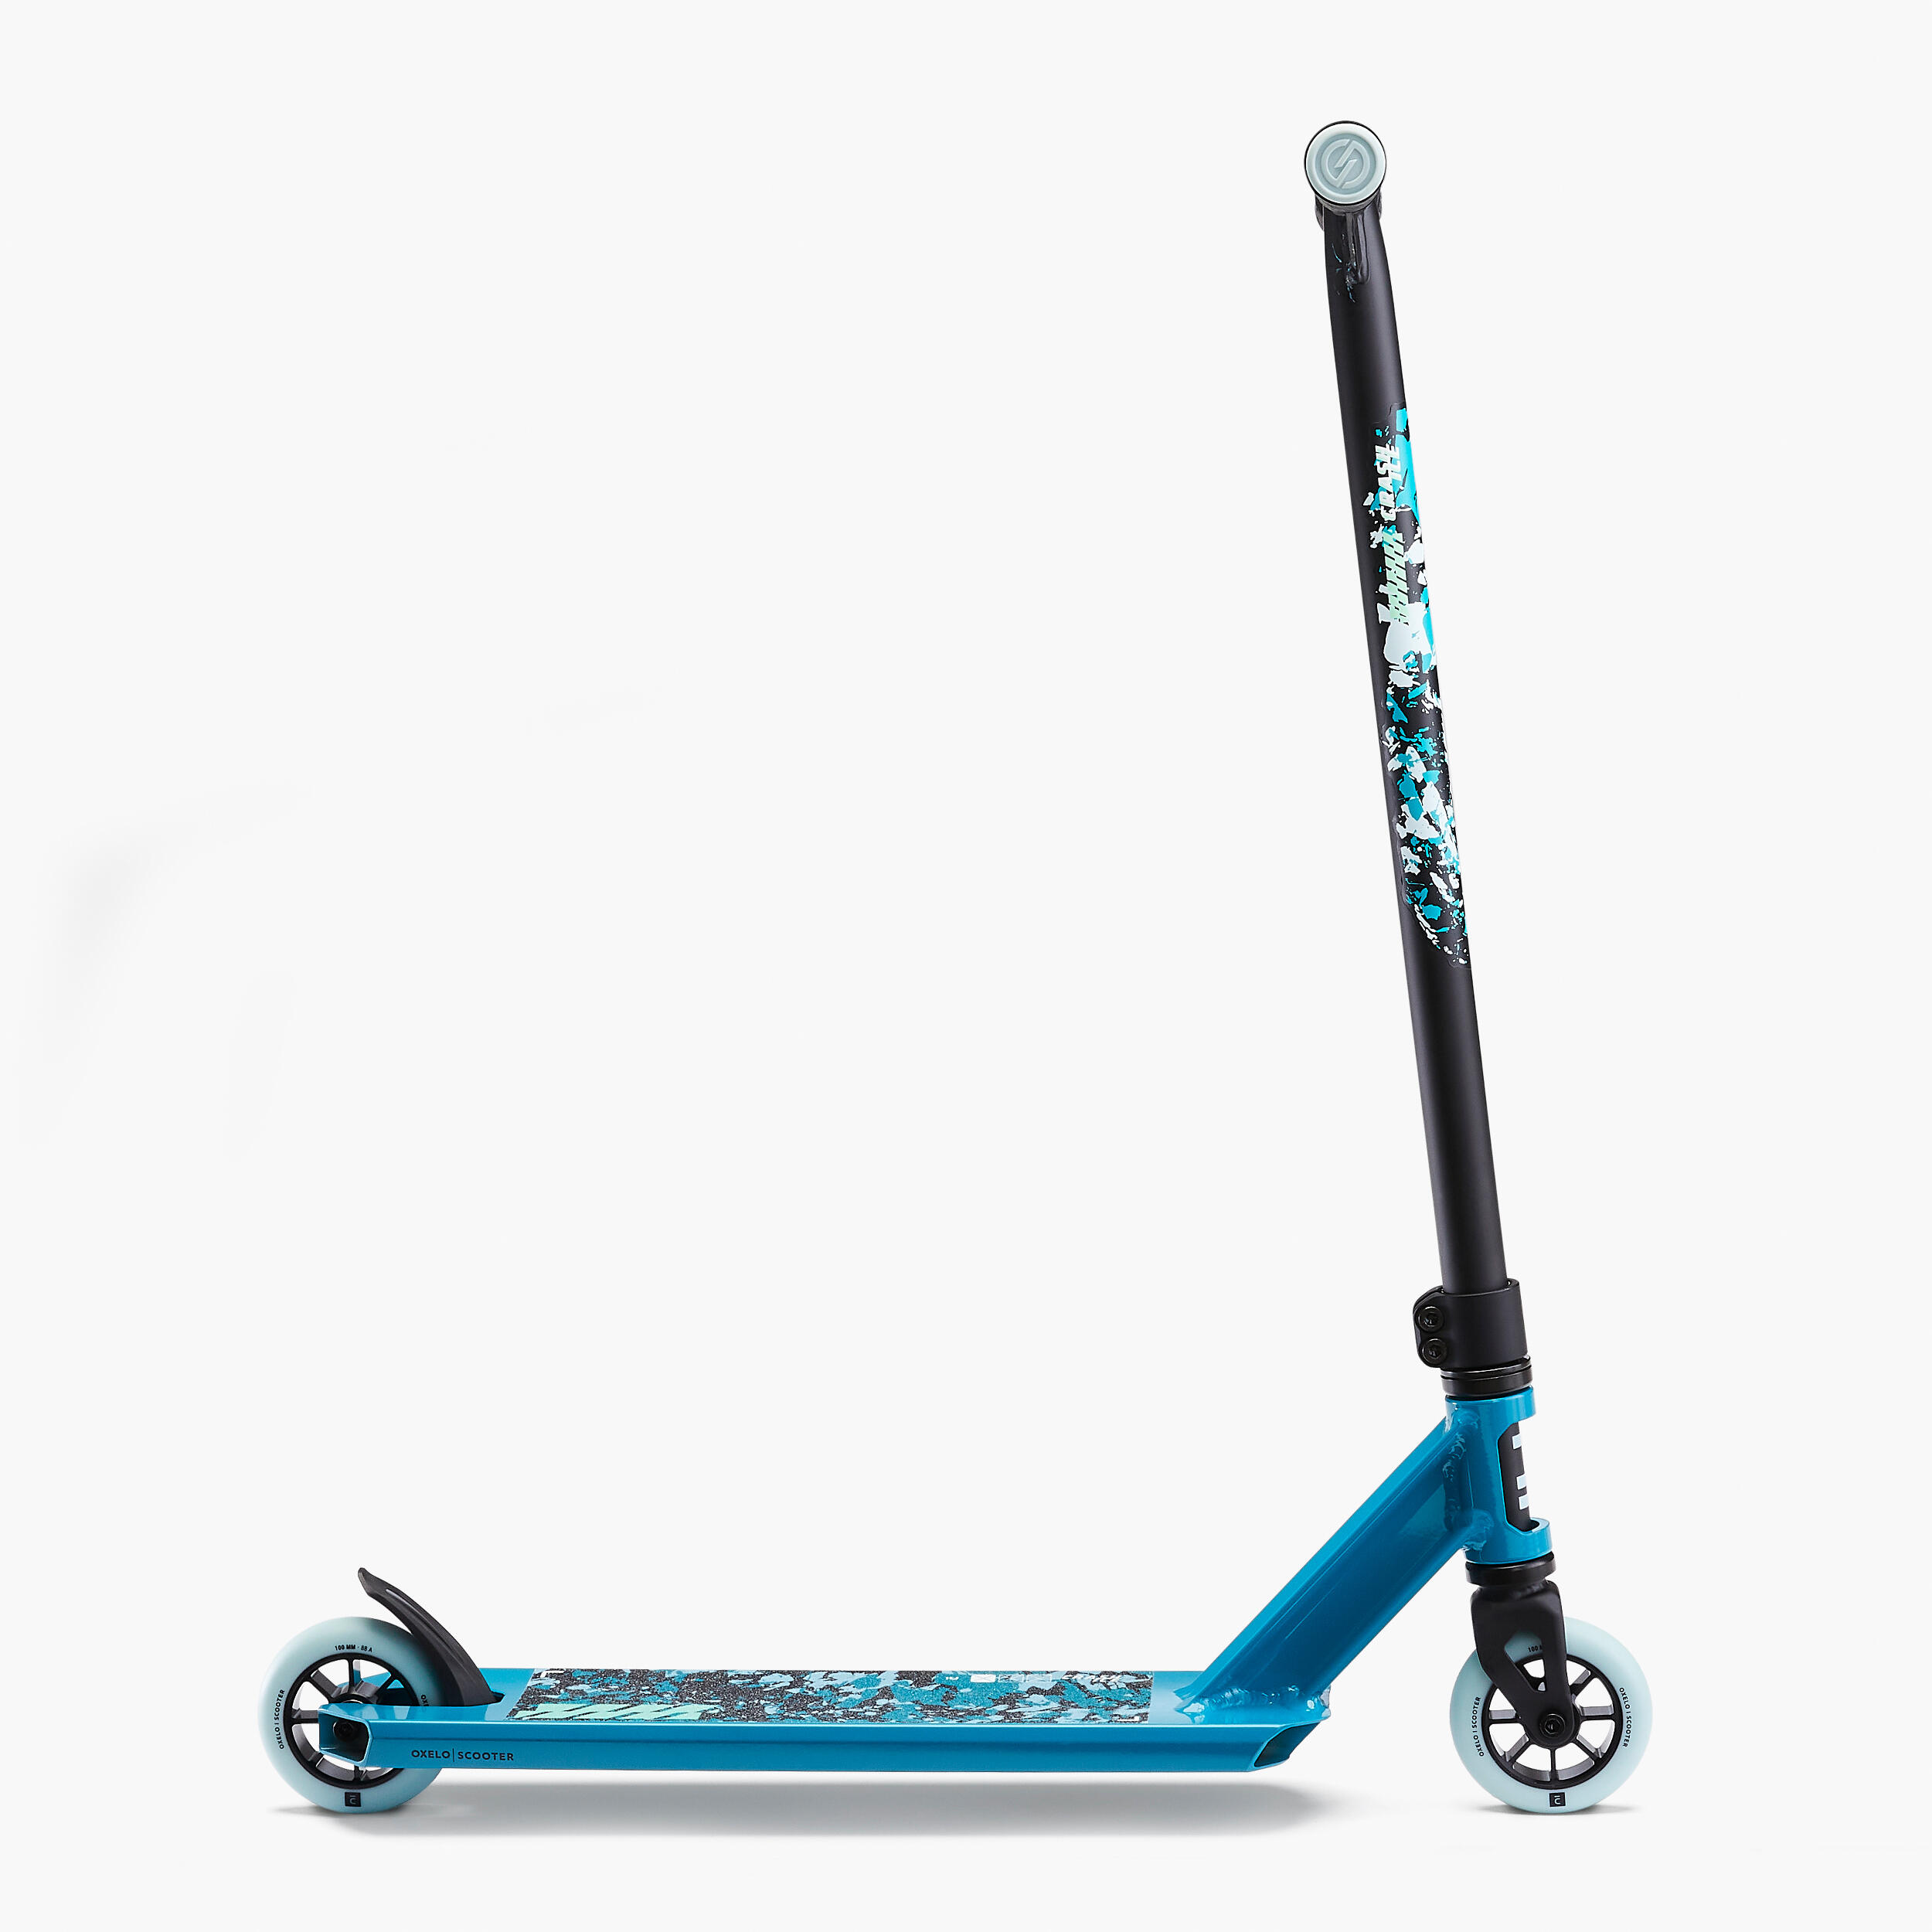 Freestyle Scooter - MF 500 Blue - OXELO